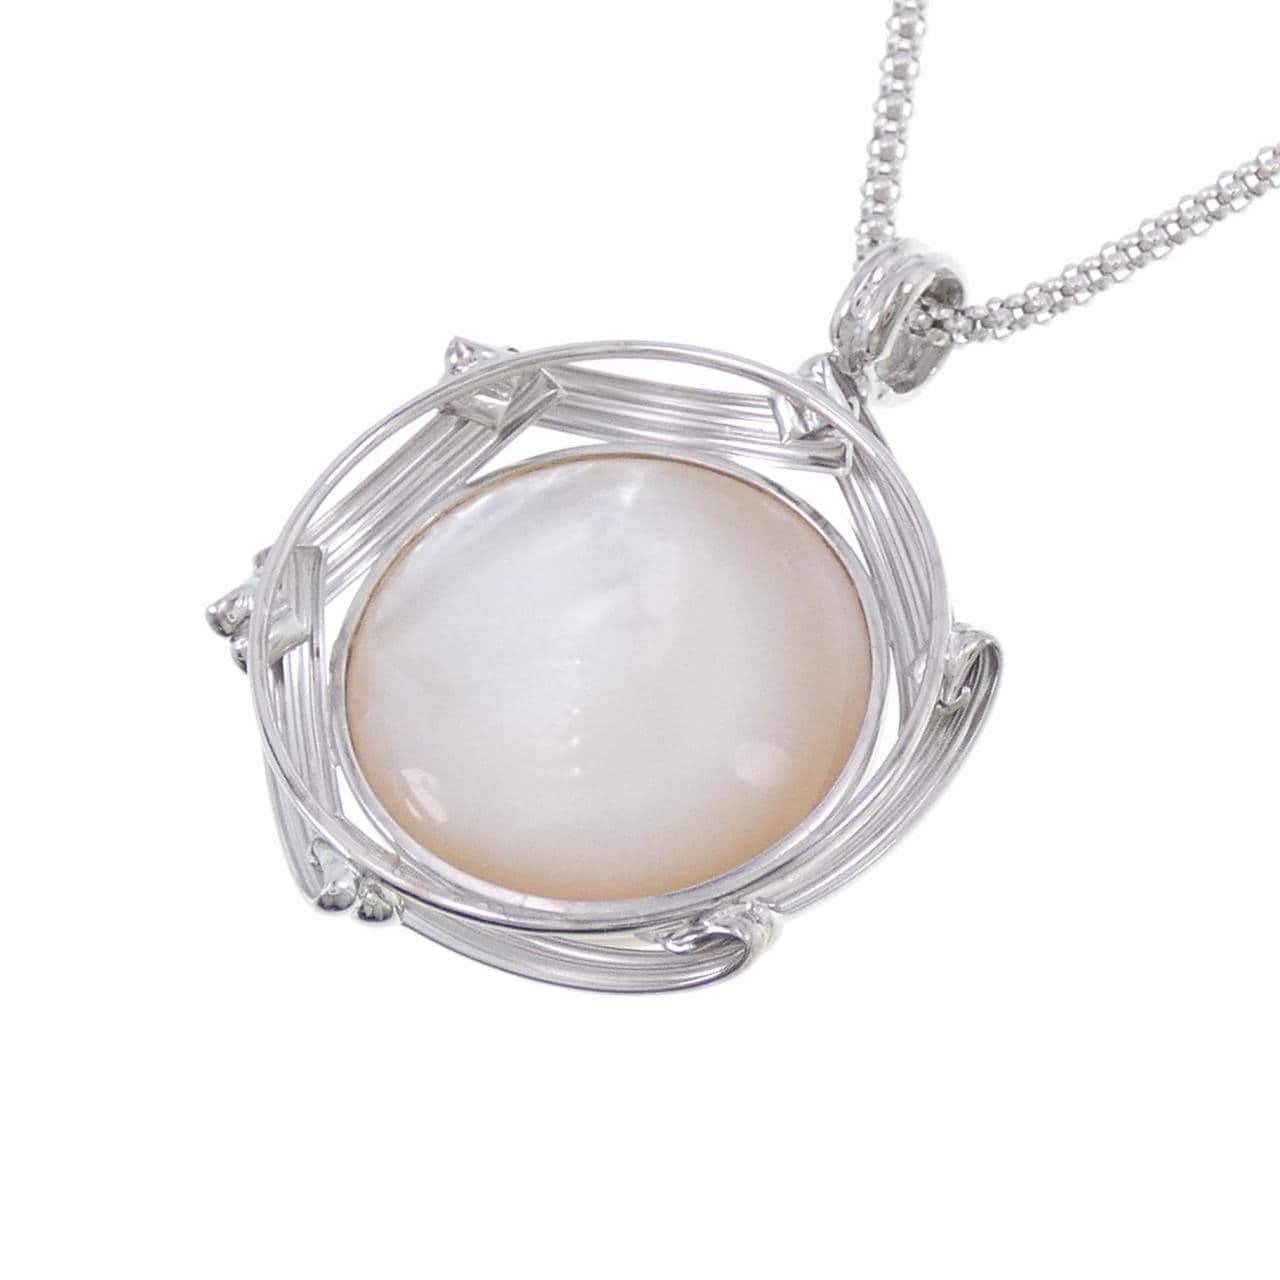 K18WG Mabe pearl necklace